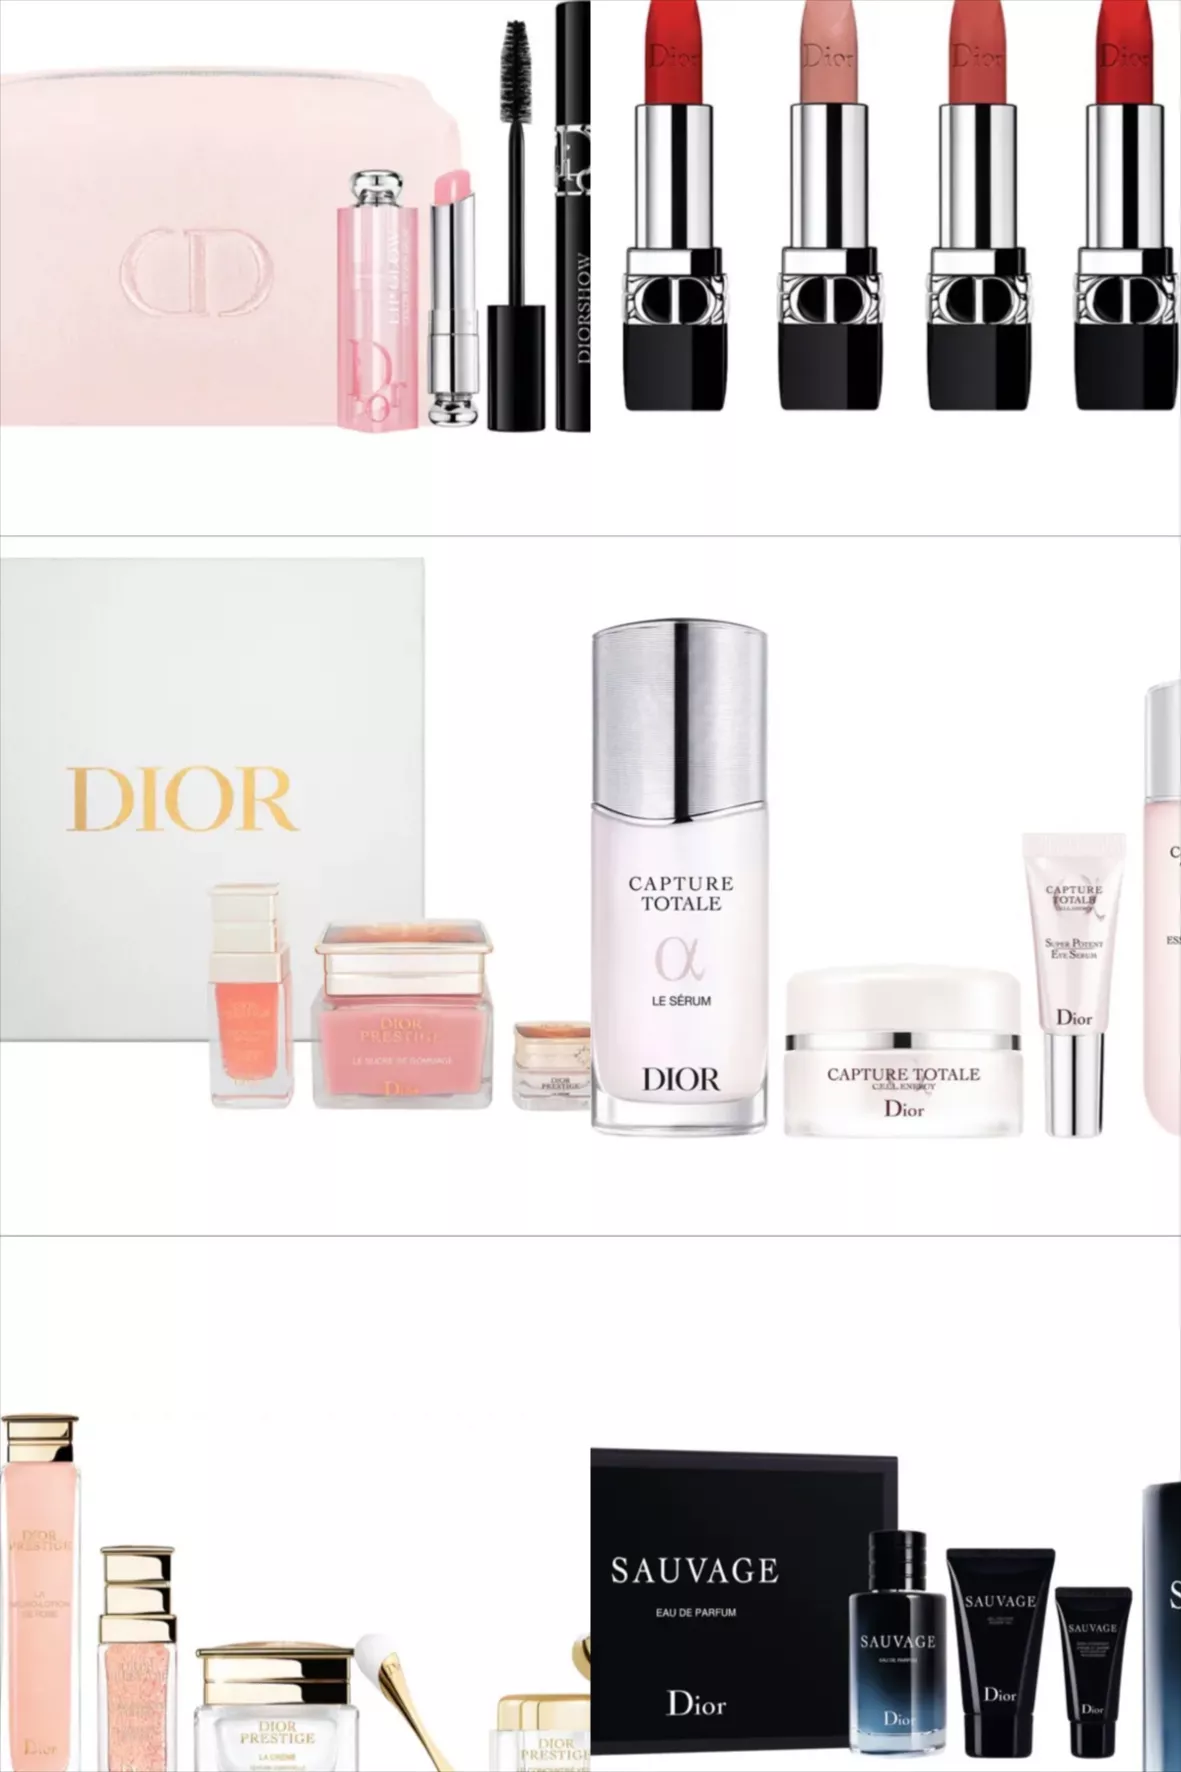 Dior's Makeup Set Is a Nordstrom Anniversary Sale Deal You'll Love